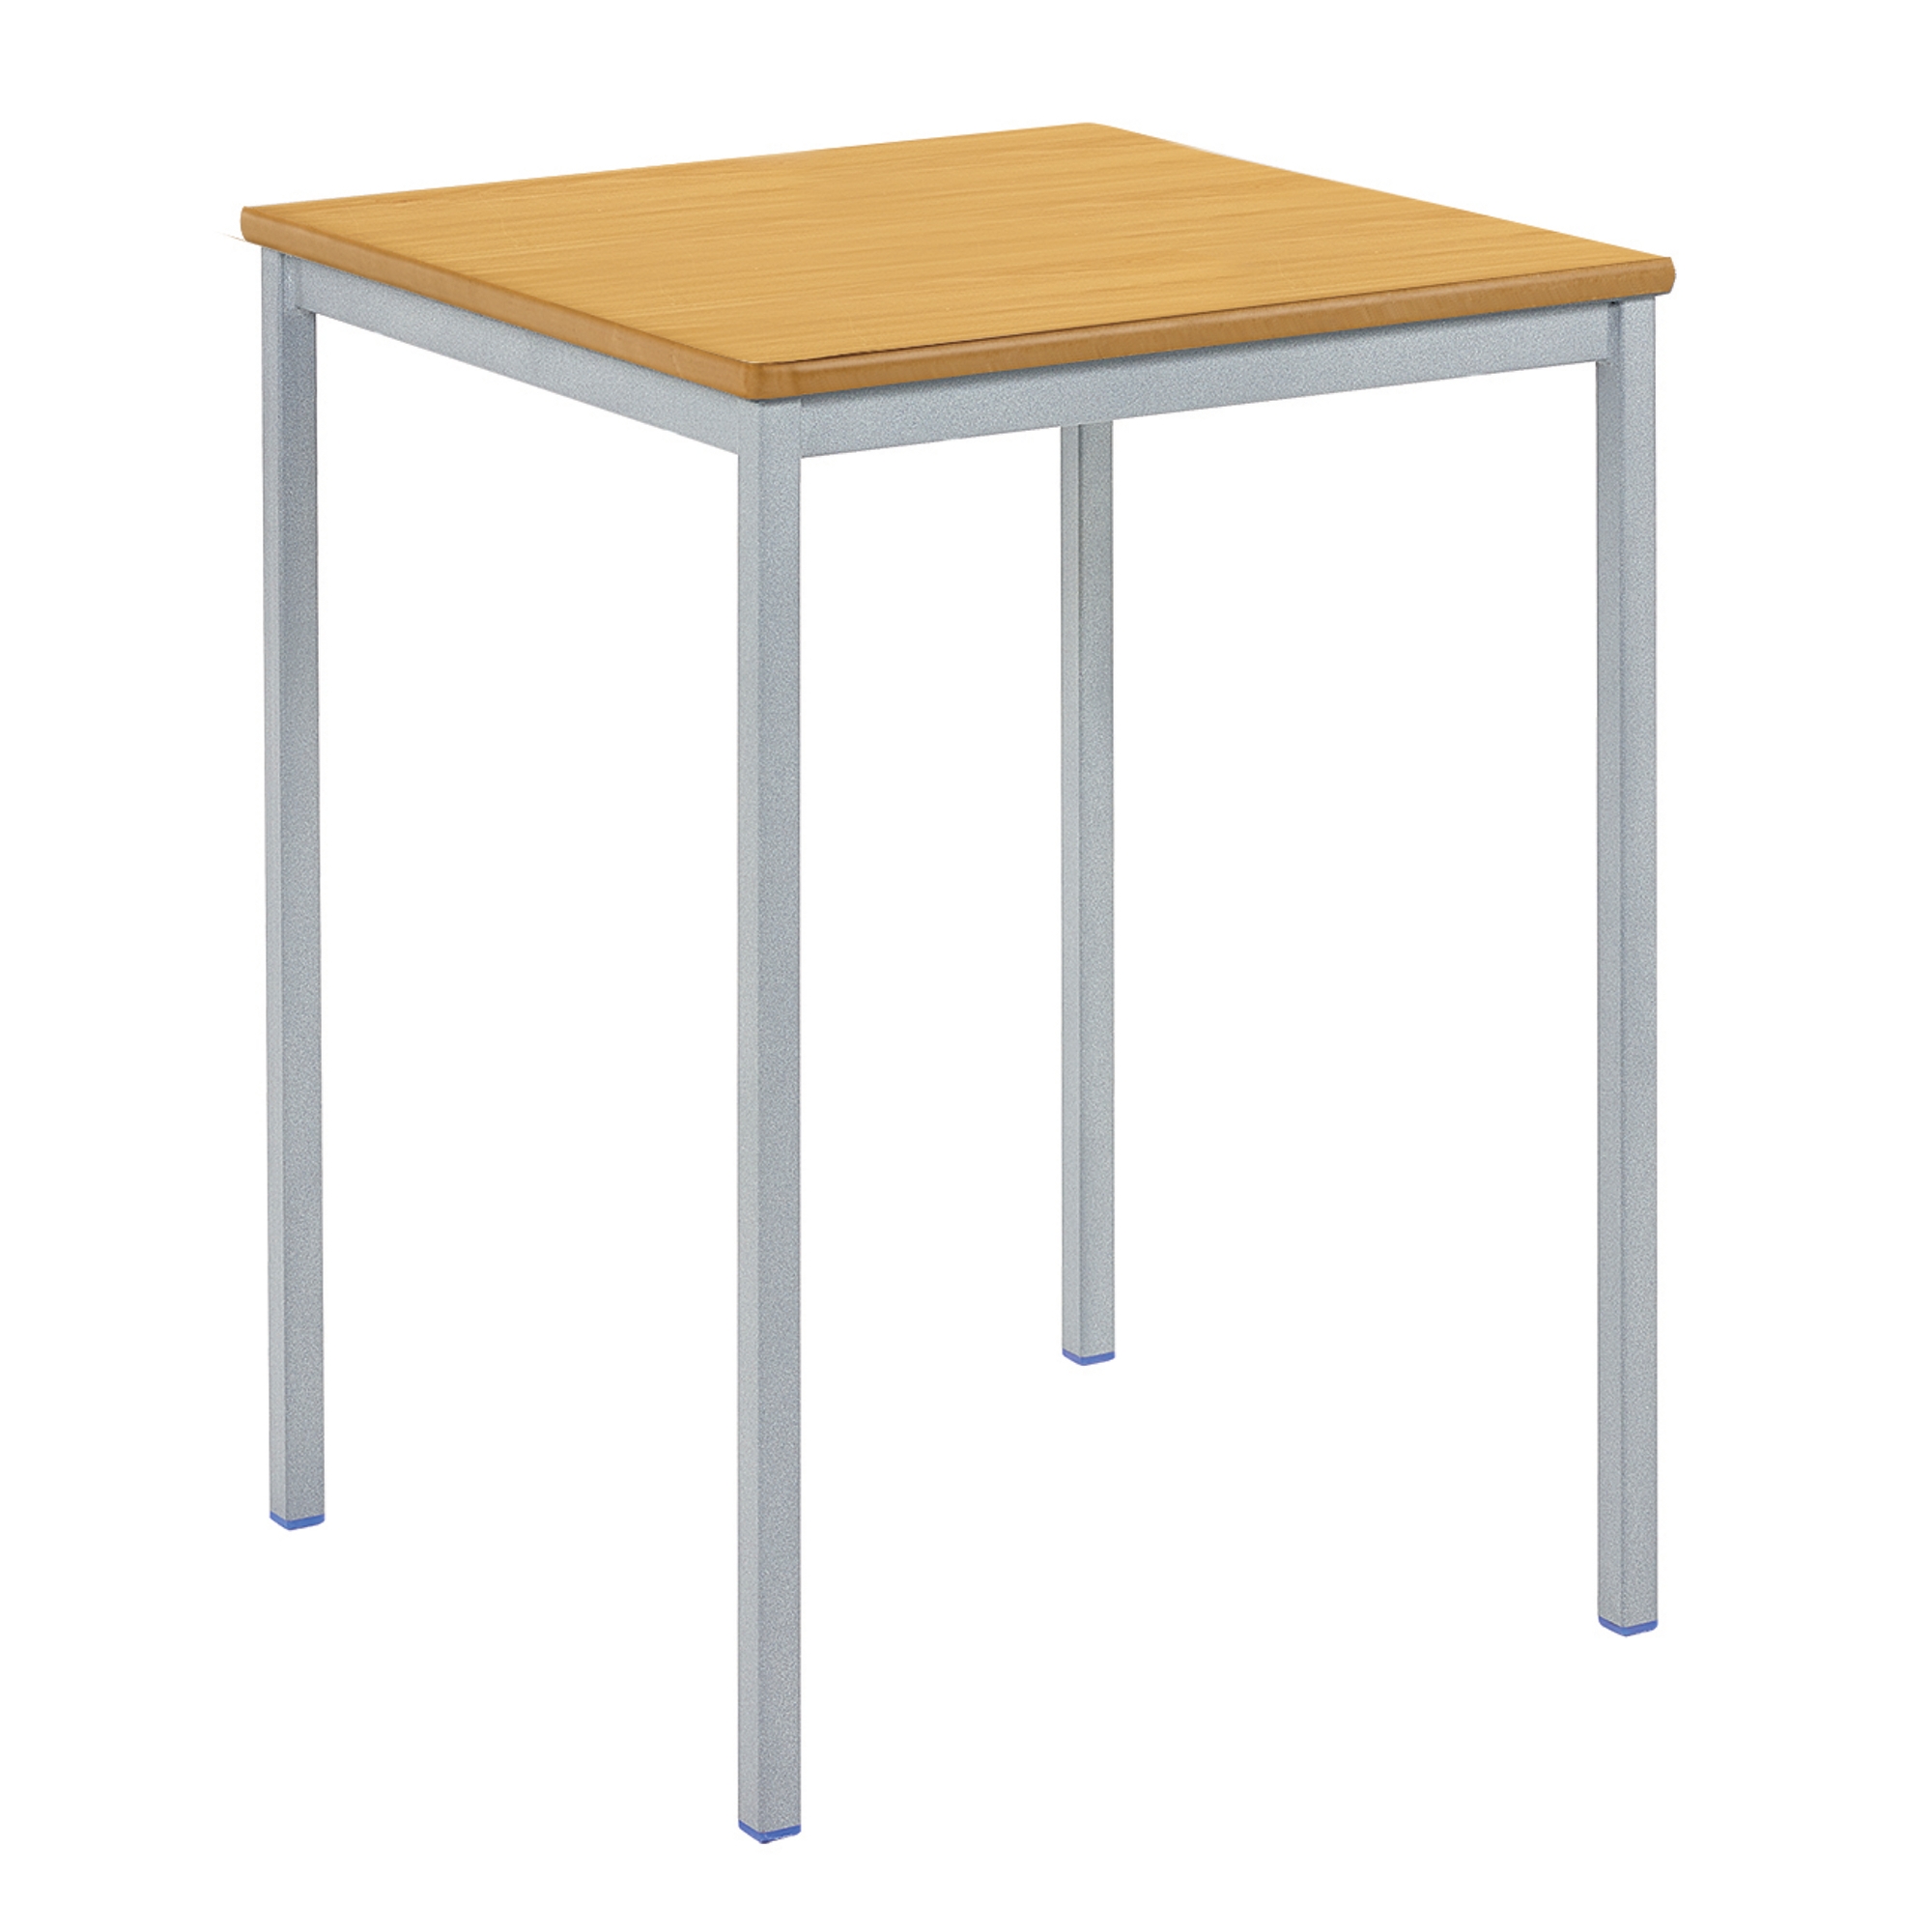 Classmates Square Fully Welded Classroom Table - 600 x 600 x 640mm - Beech